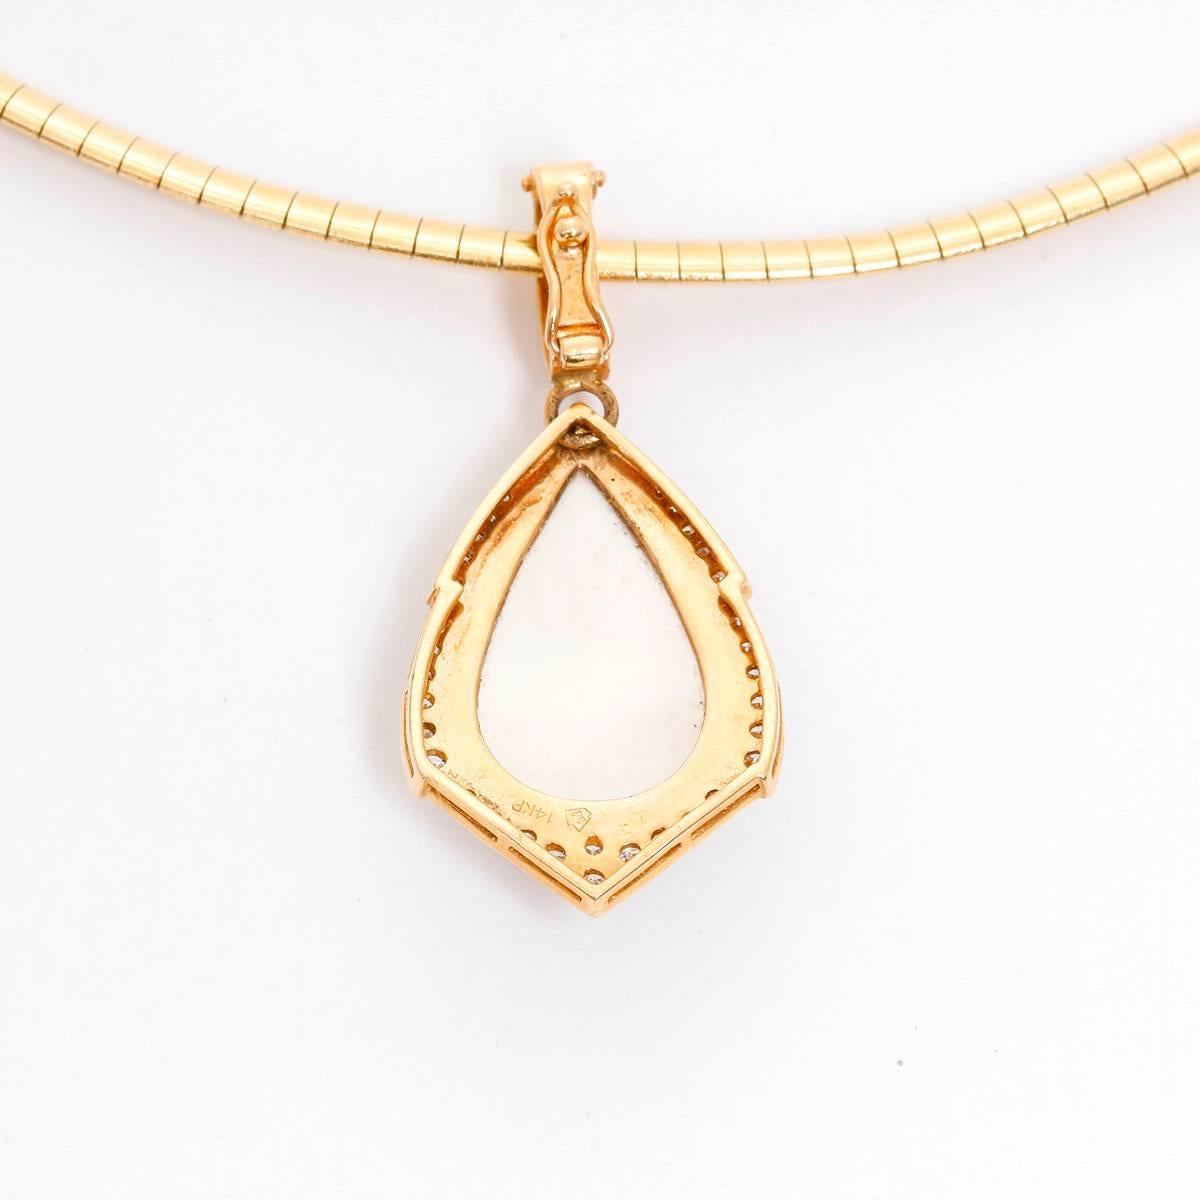 Mother of Pearl and Diamond Necklace - . 14K Yellow Gold Italian link necklace with a Mother pearl tear drop pendant surrounded by round brilliant diamonds. Necklace length 16 inches.  Total weight 22.2 grams.